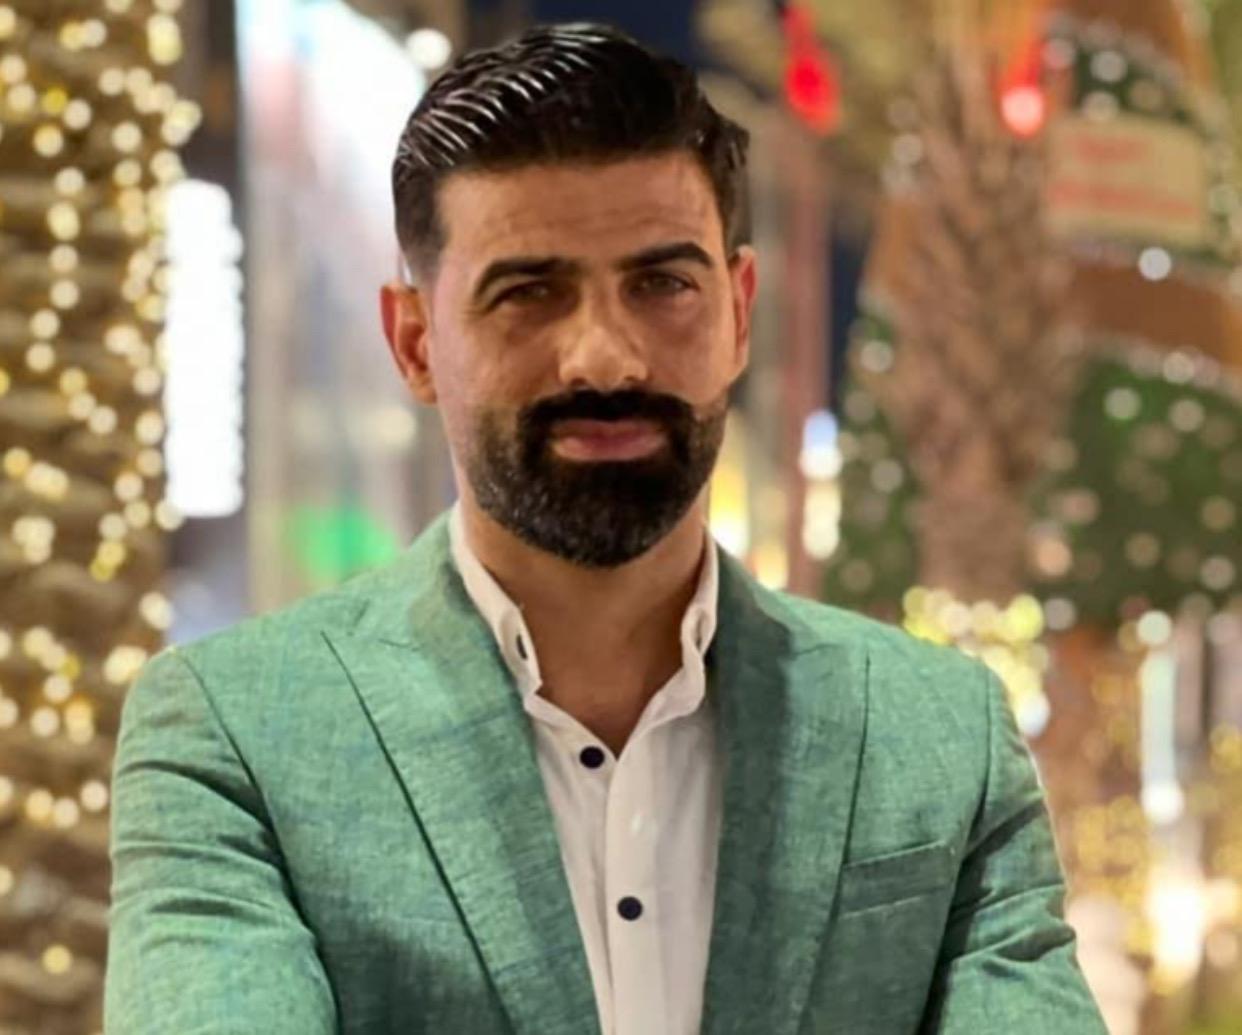 Journalist Haider Hadi: I was subjected to beatings and threats in Karbala